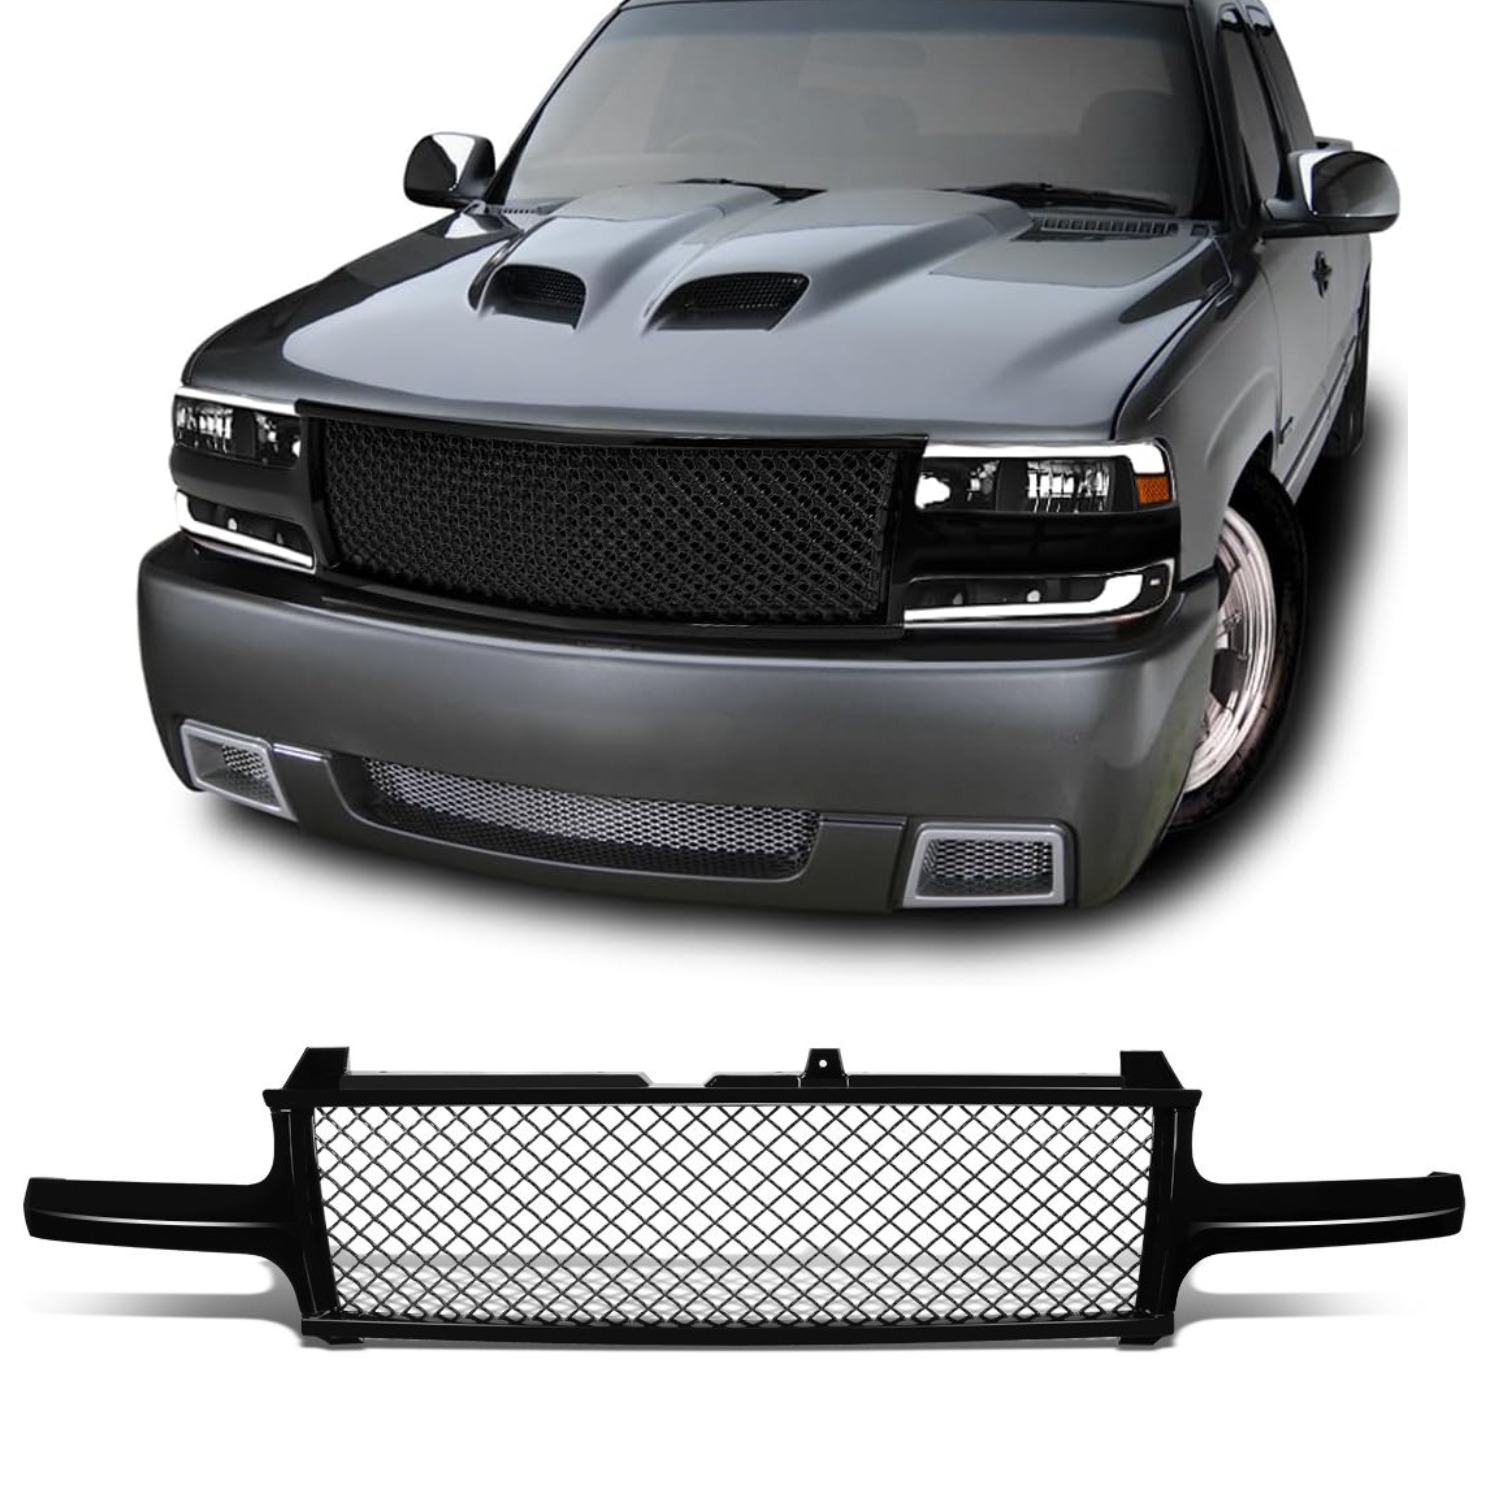 Front Grill Grille for 1999-2002 Chevrolet Silverado 1500 HD Suburban 2500 Tahoe